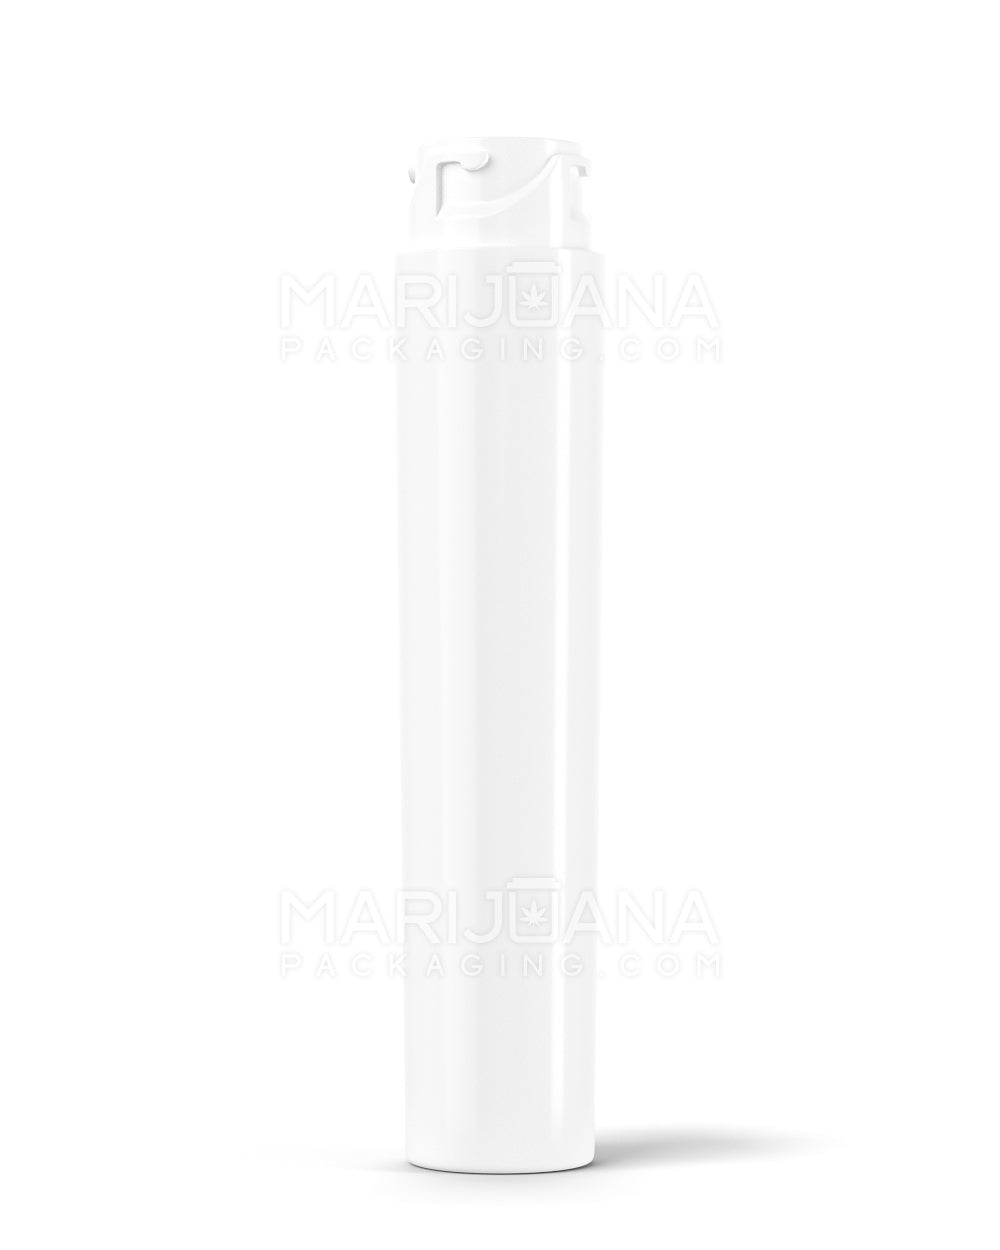 Child Resistant | Push Down & Turn Vape Cartridge Container | 72mm - White Plastic - 1650 Count - 6